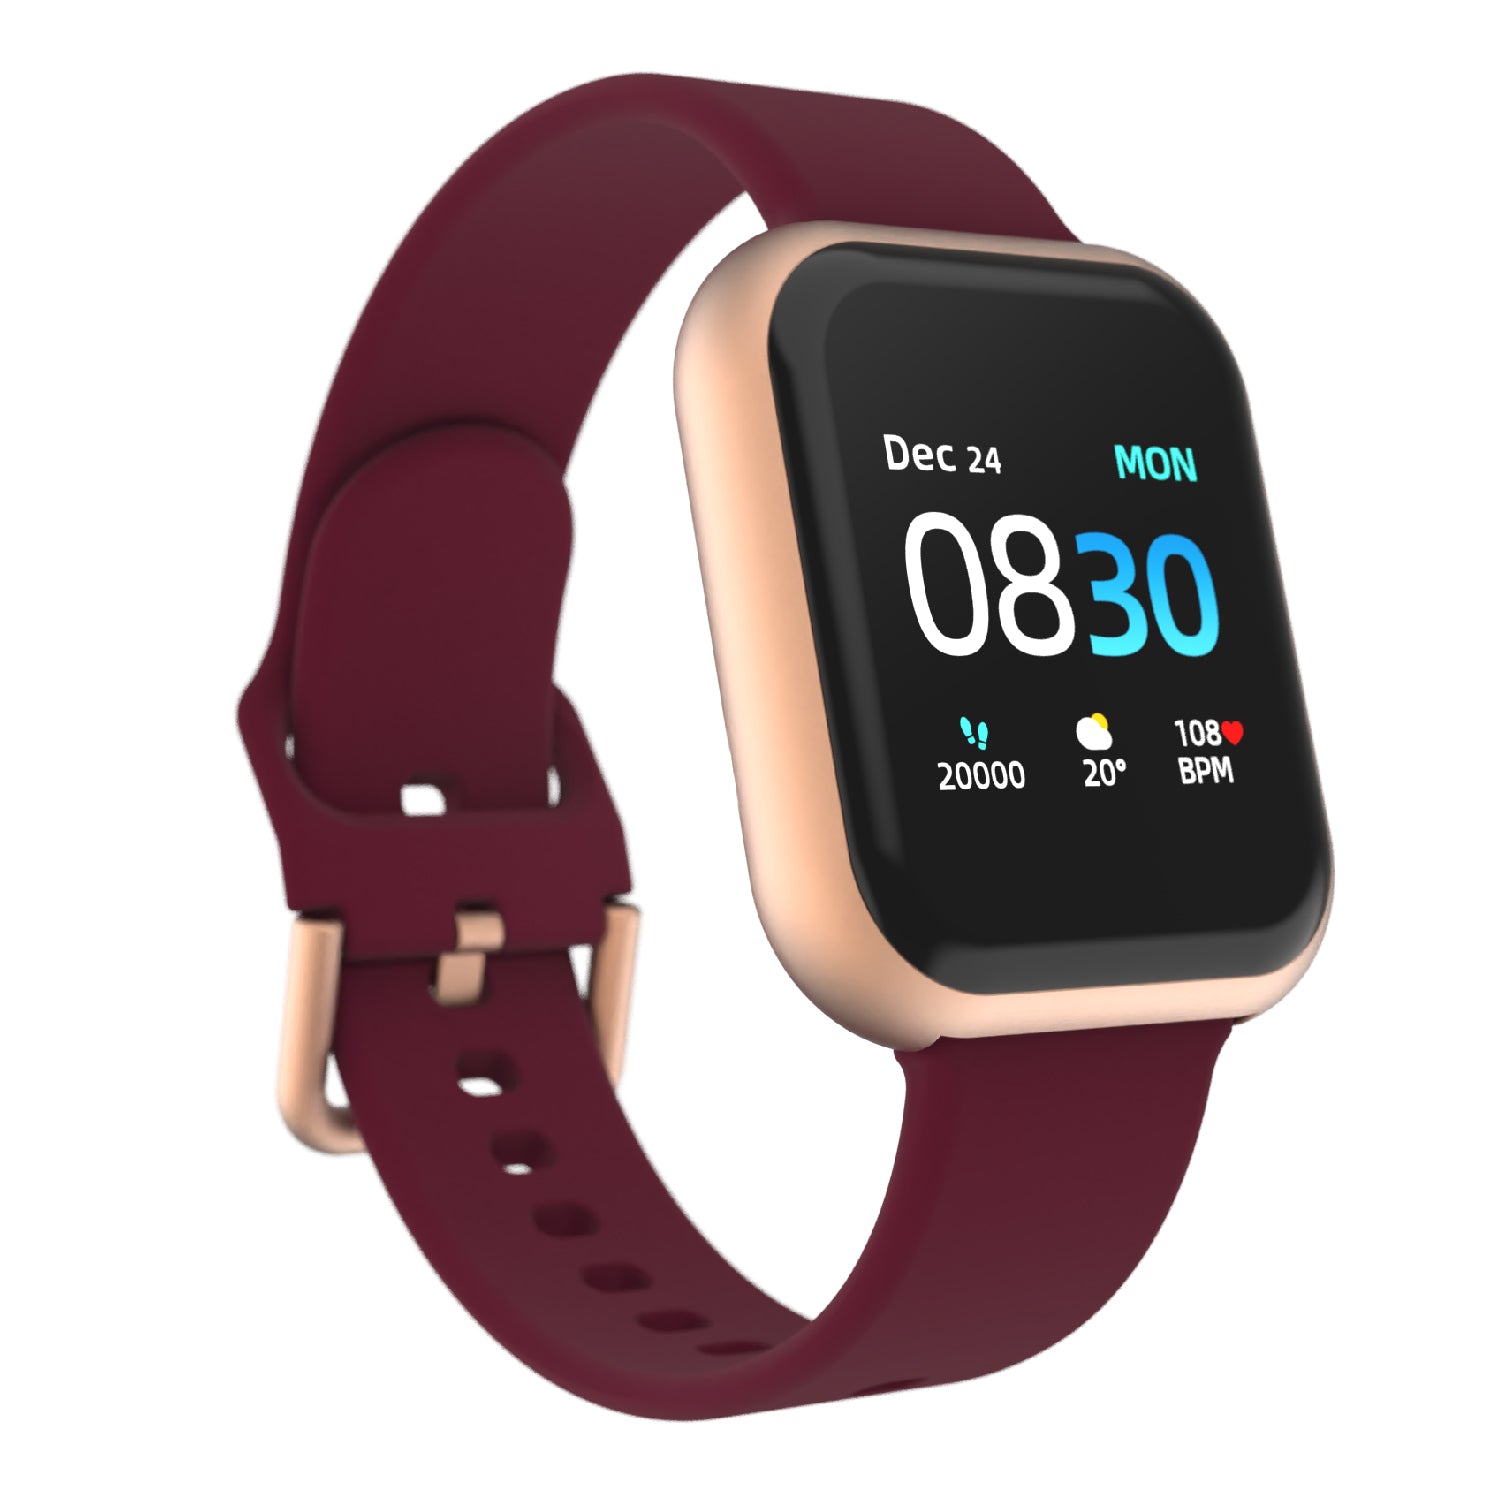 iTouch Air 3 Smartwatch in Rose Gold with Merlot Strap